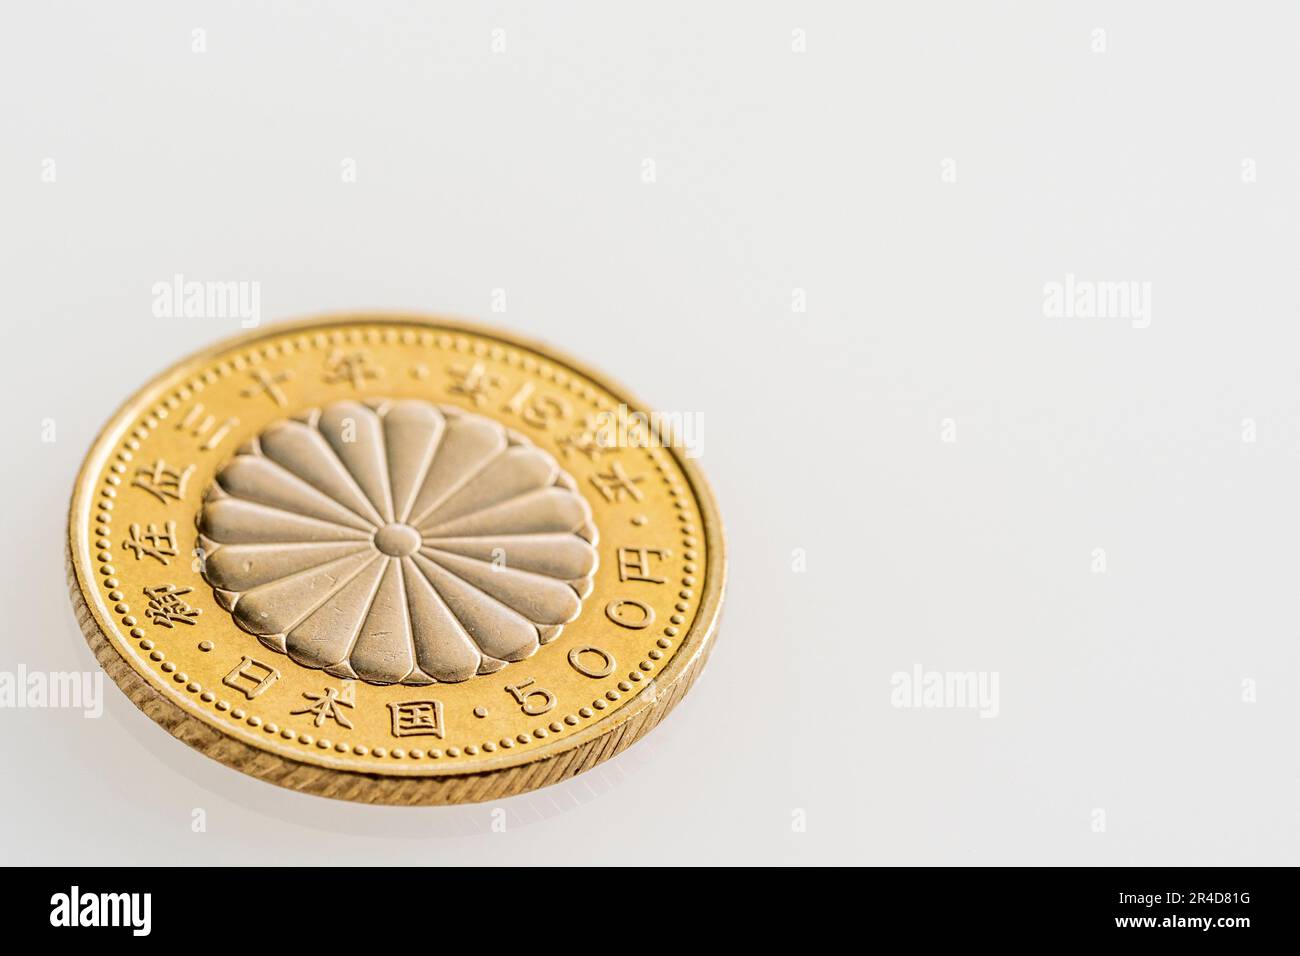 Japanese commemorative 500 yen coin issued in 2019, Heisei 31, to celebrate the 30th anniversary of the enthronement of the Emperor. Stock Photo